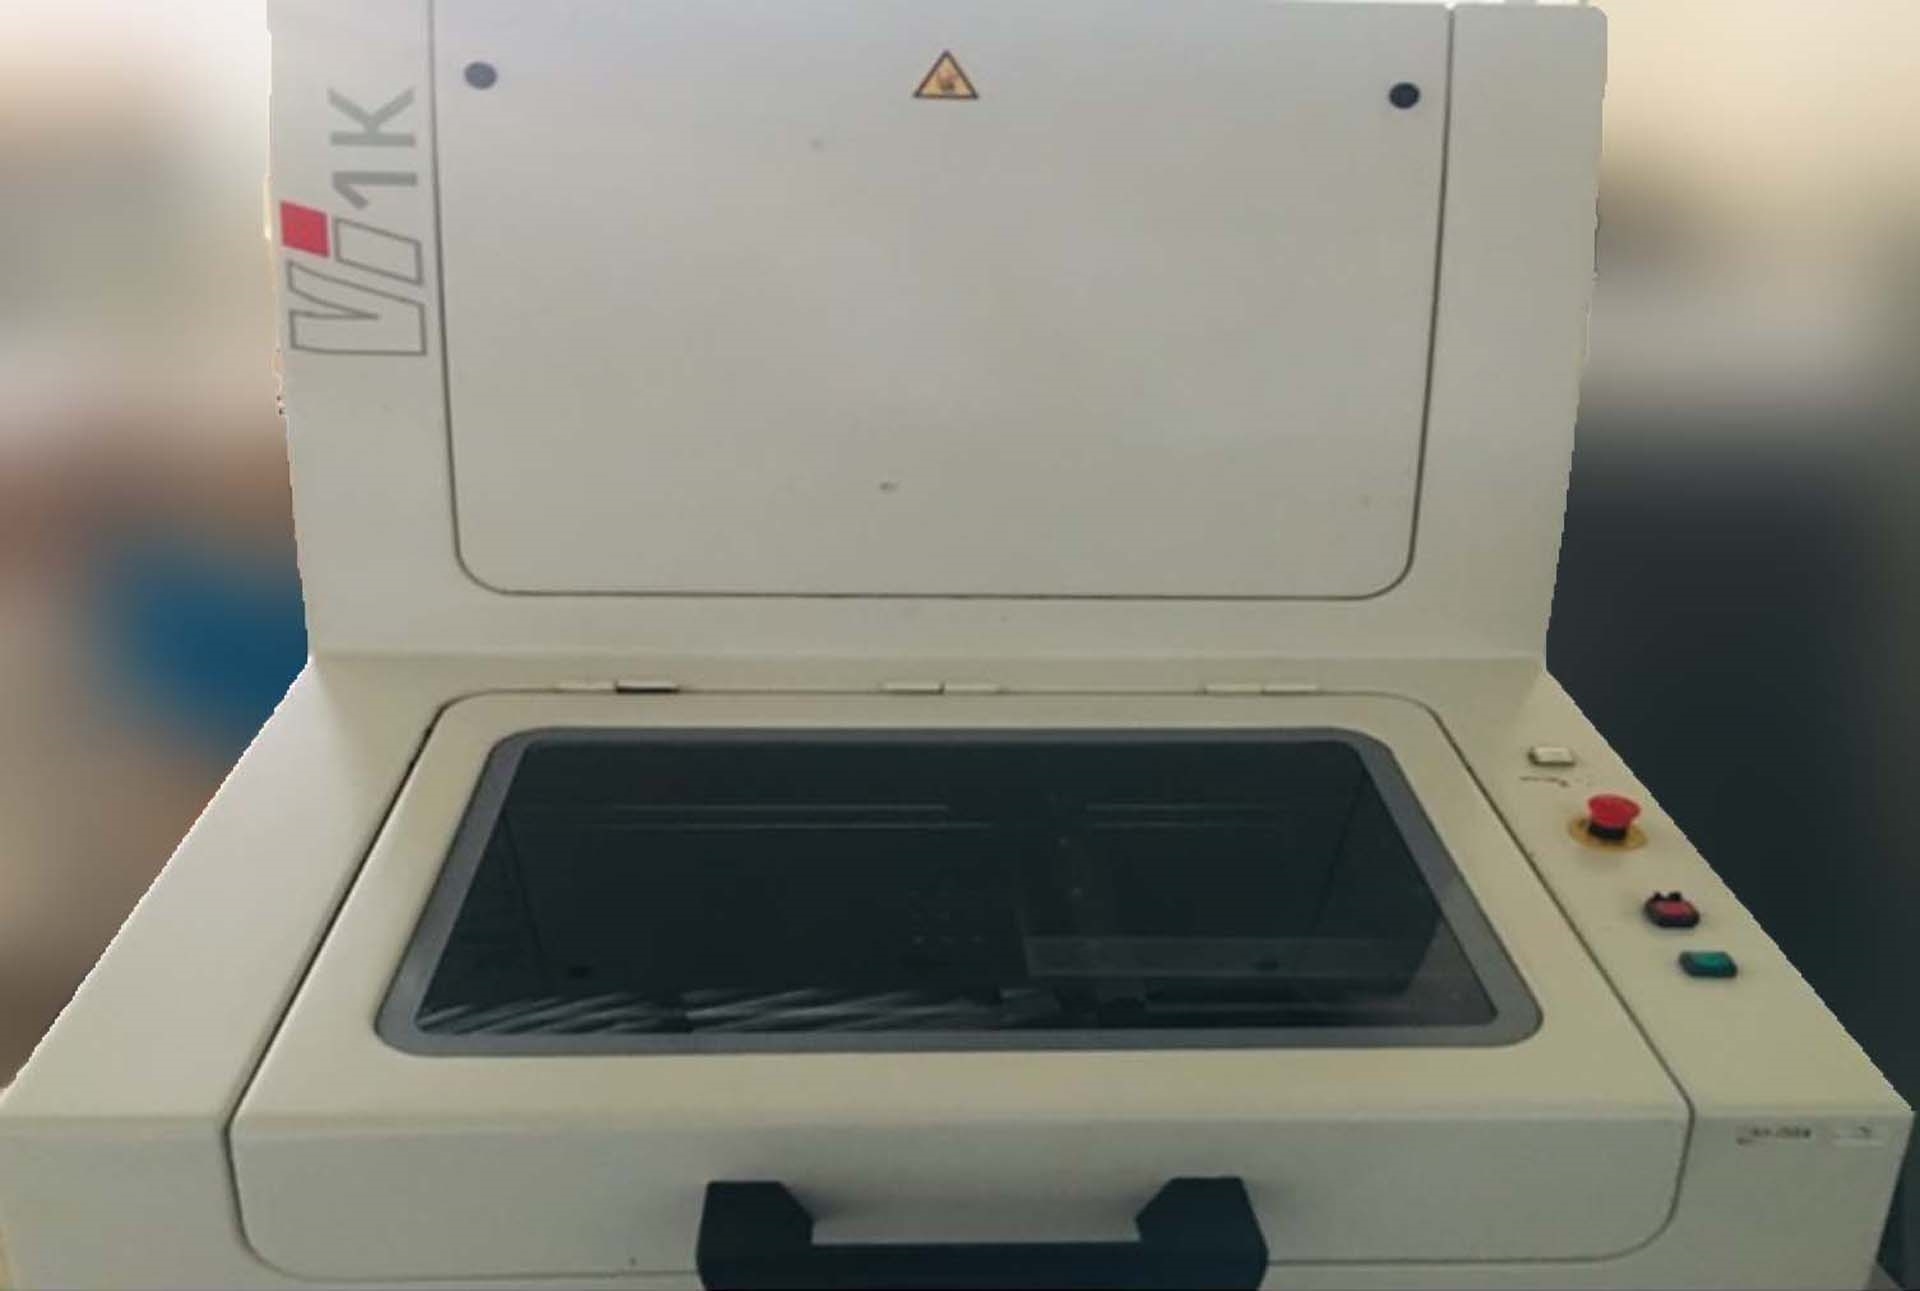 VI TECHNOLOGY Vi 1K used for sale price #9241657, 2007 > buy from CAE